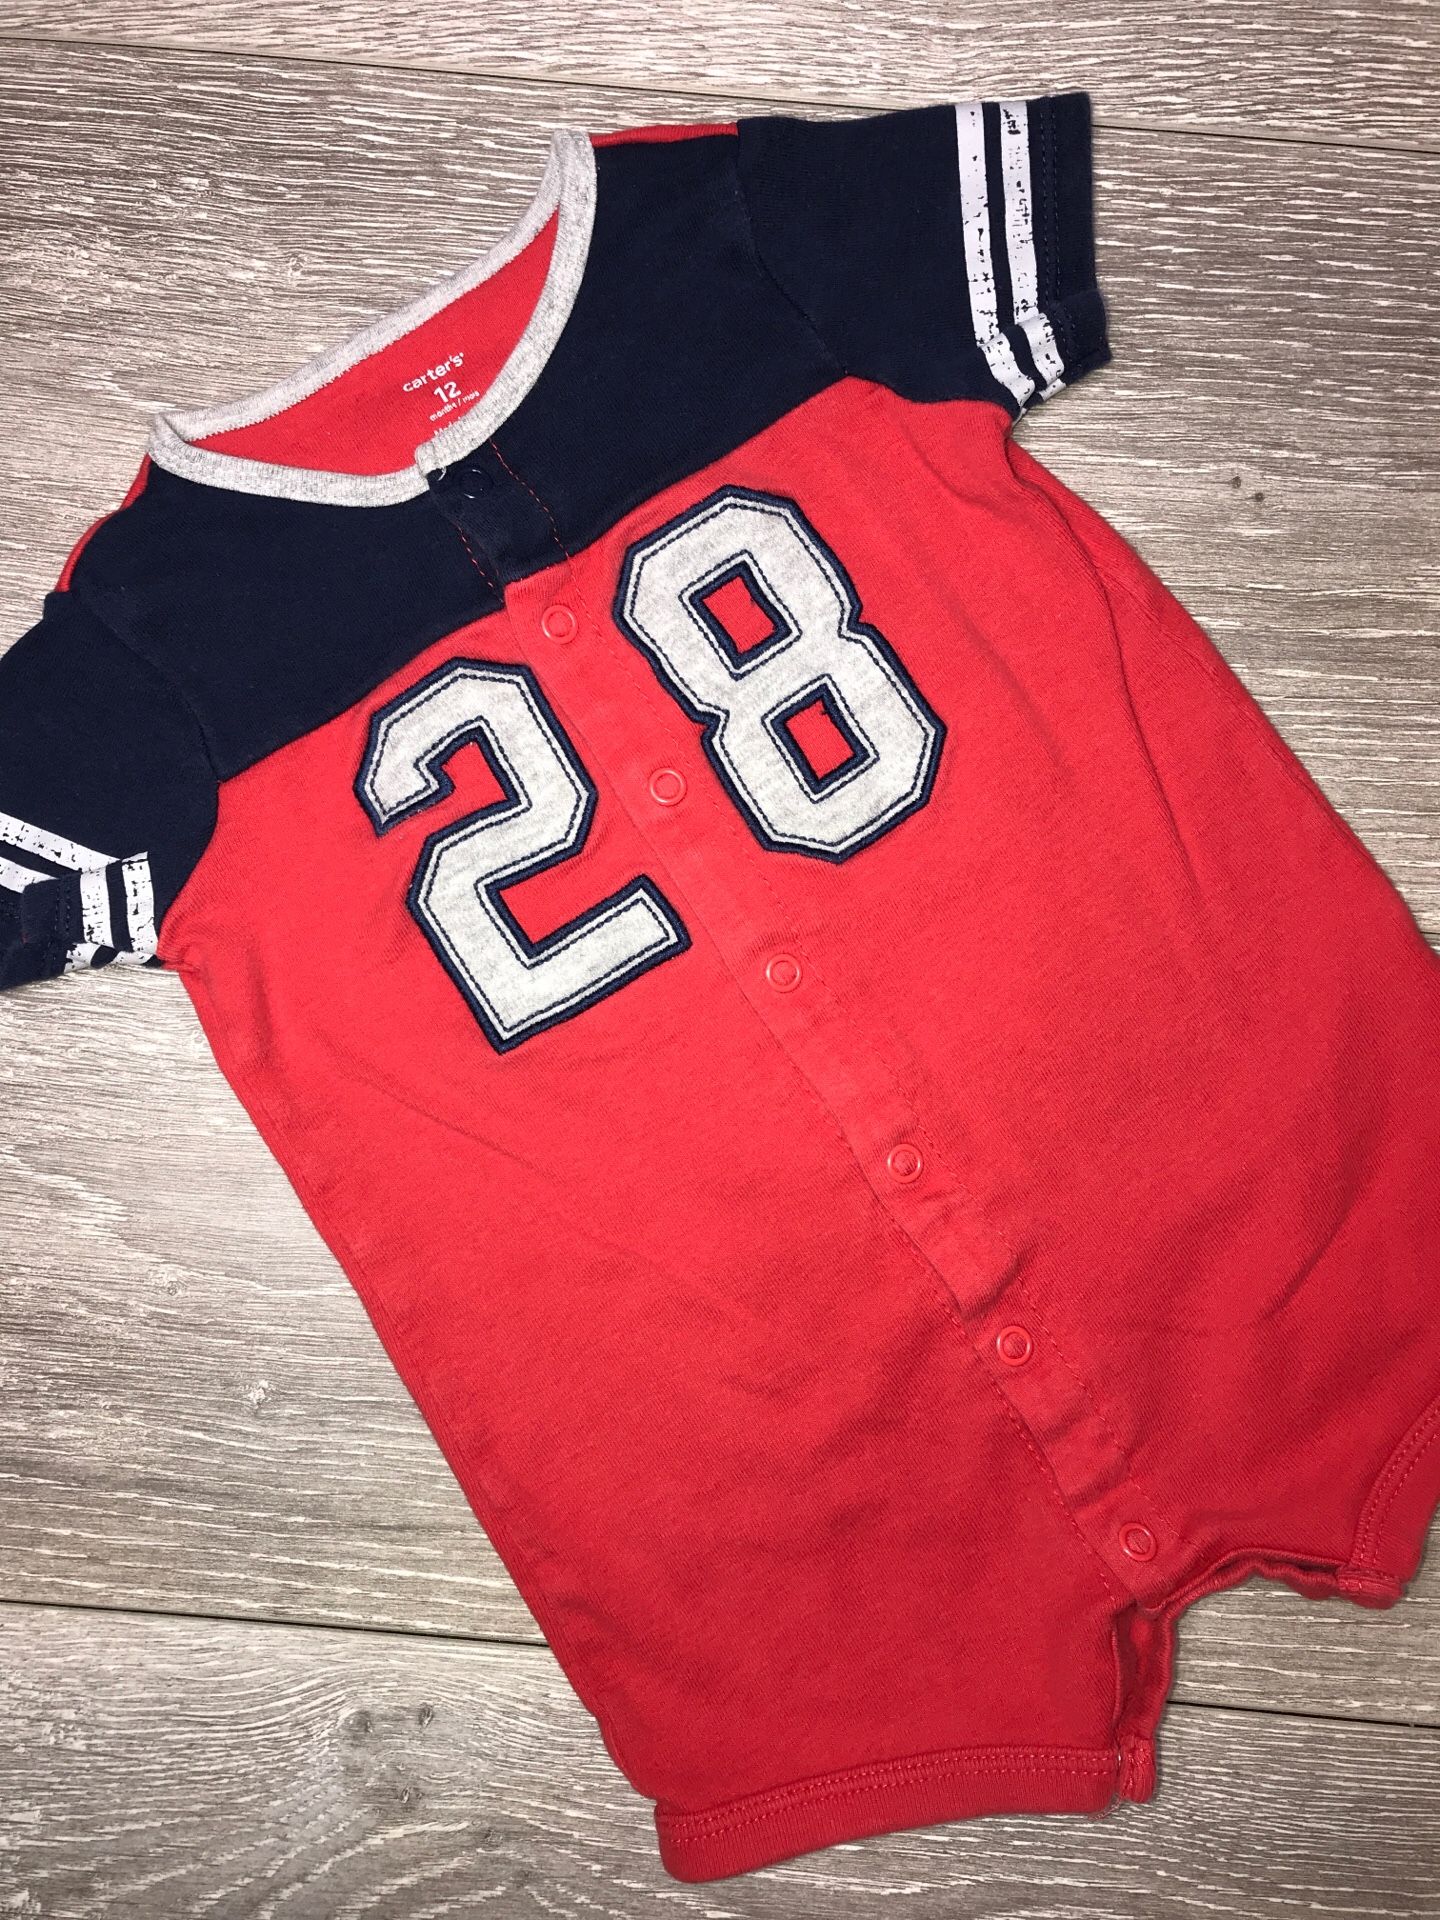 Baby Boy Clothing Carter’s Romper 12 Months $1